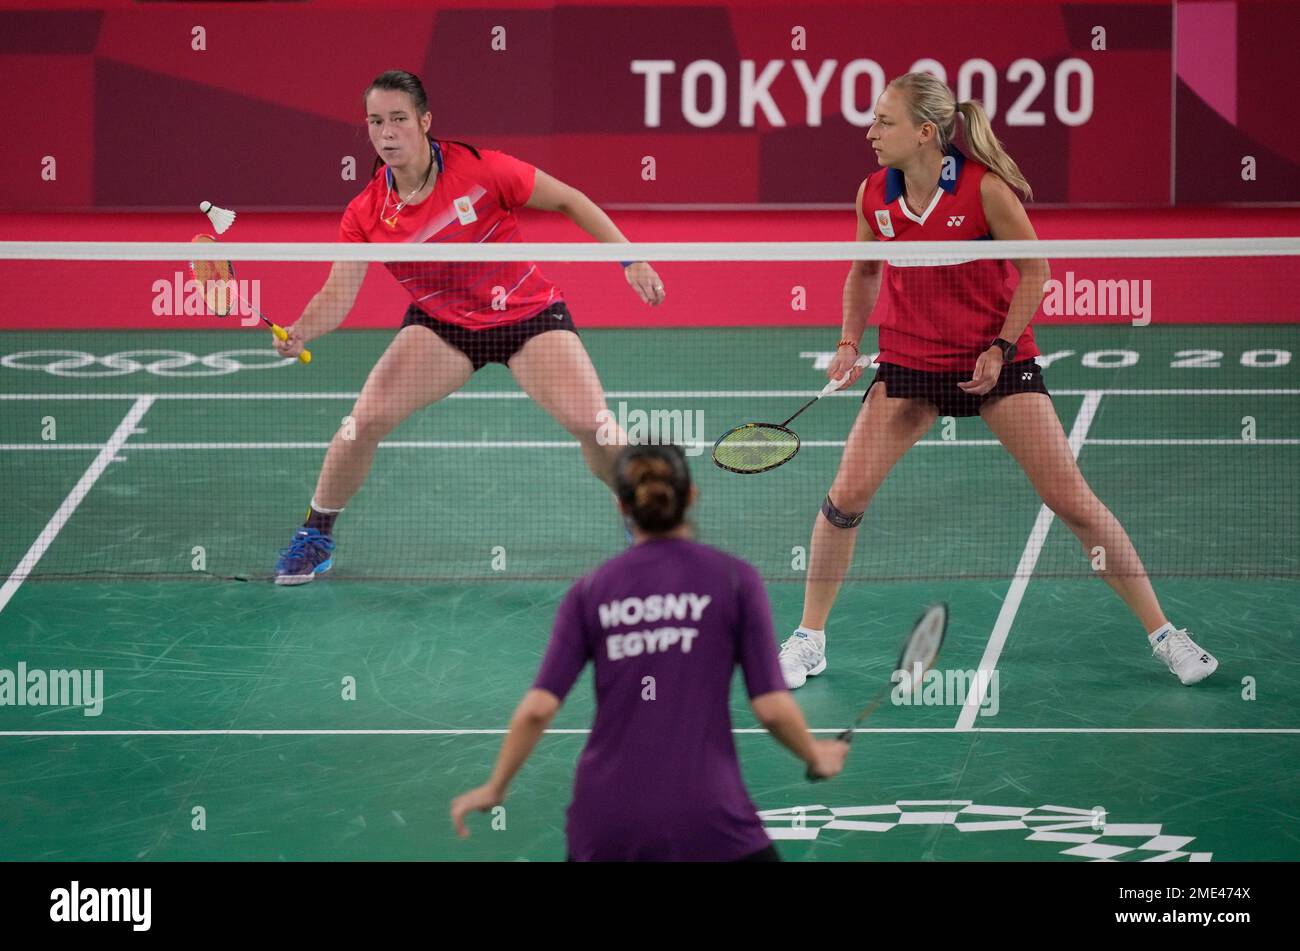 Selena Piek and Cheryl Seinen of Netherlands compete against Egypt's Doha  Hany and Hadia Hosny during women's doubles Badminton match at the 2020  Summer Olympics, Monday, July 26, 2021, in Tokyo, Japan. (